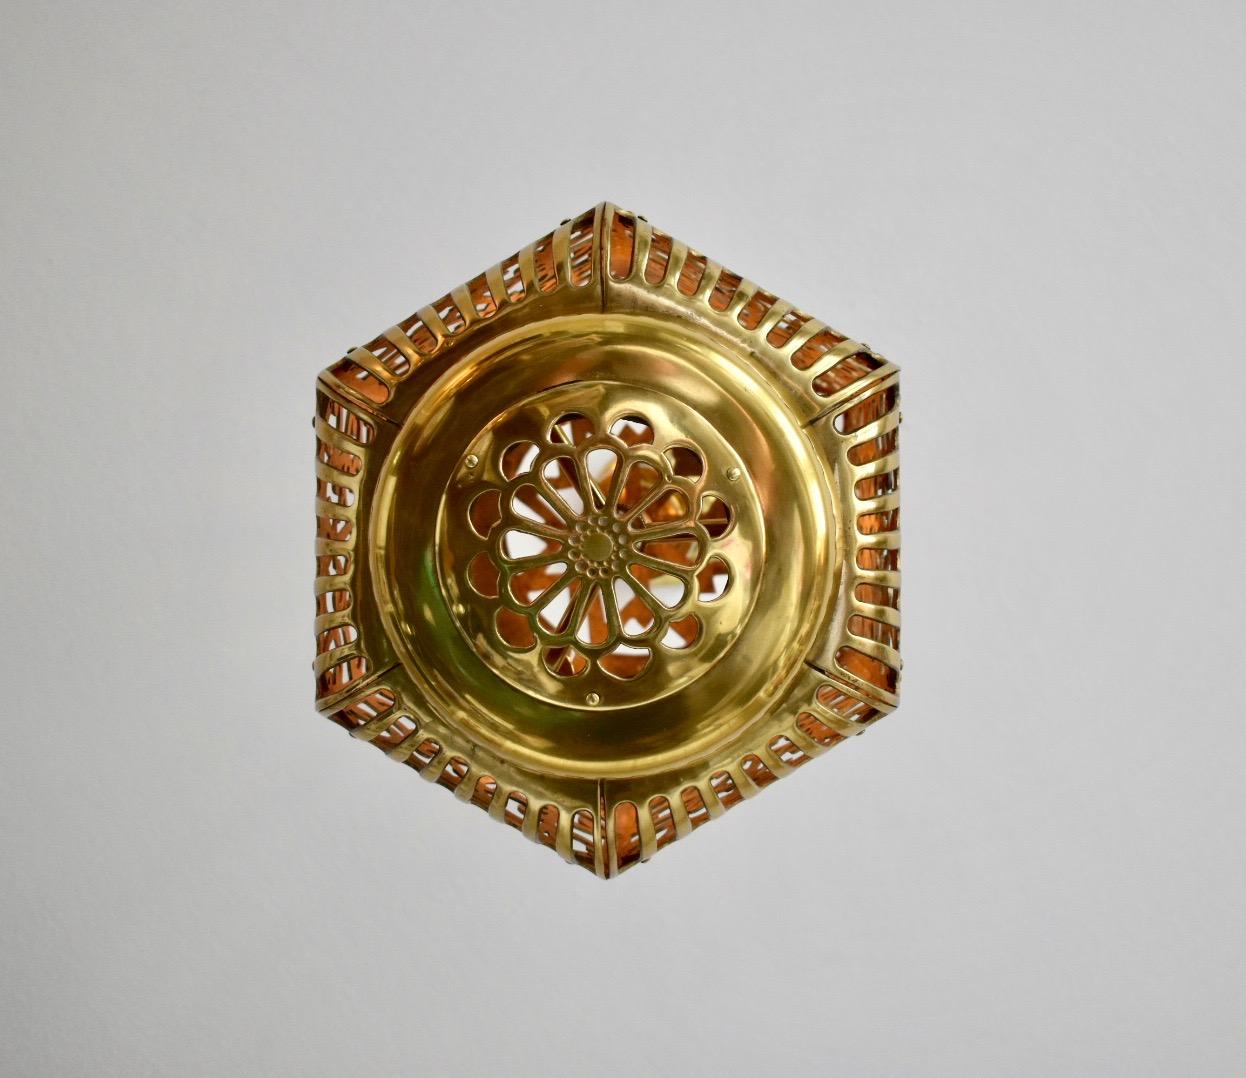 Large Pierced Karakusa Brass Japanese Asian Ceiling Pendant Light In Good Condition For Sale In Dallas, TX